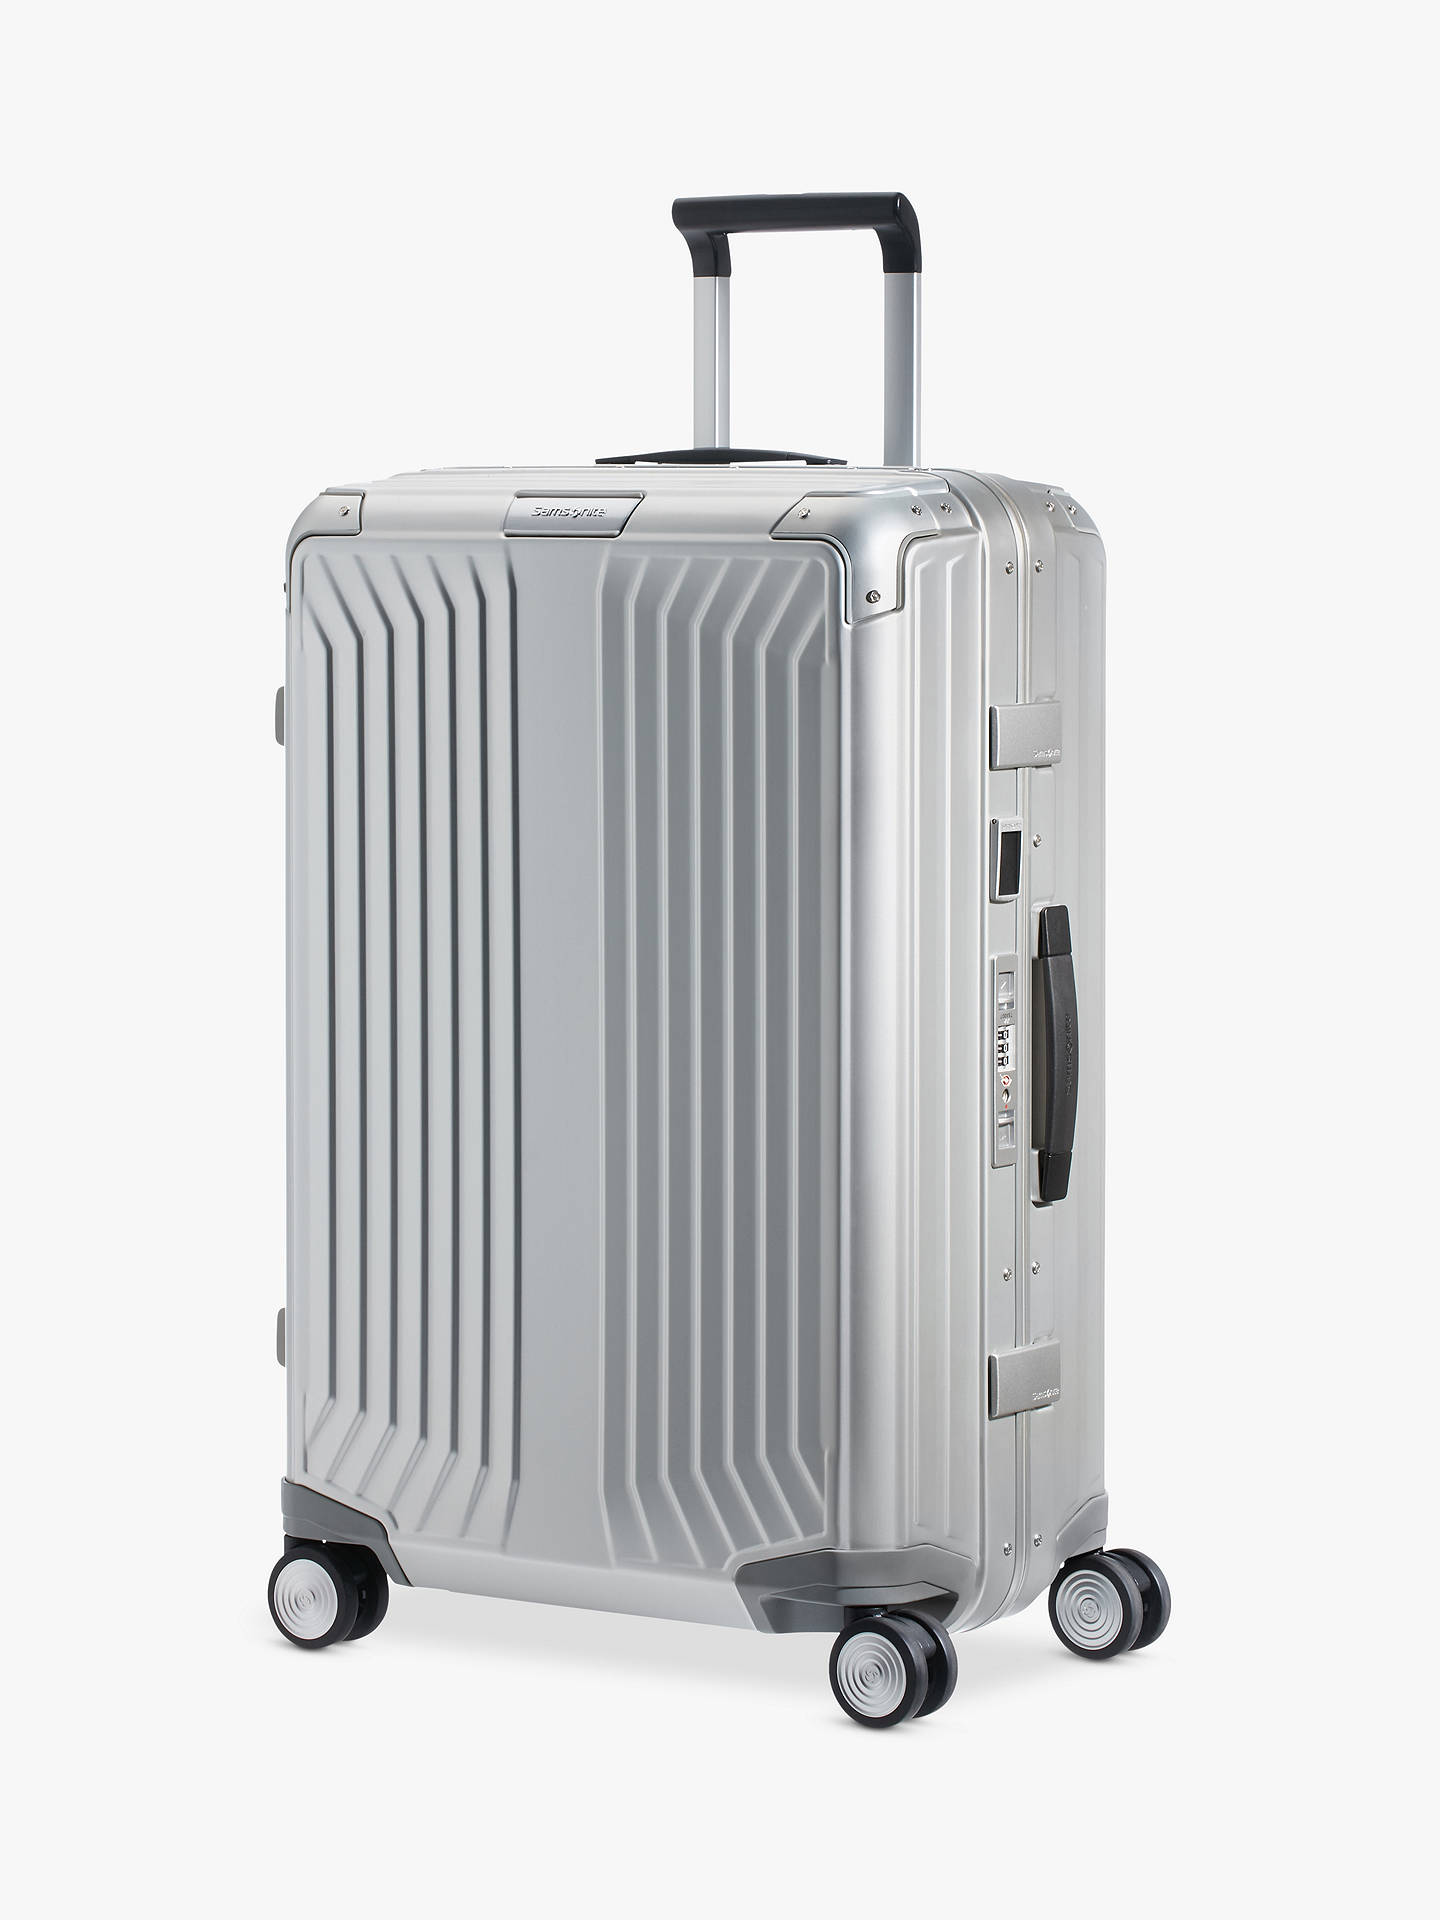 How to Spot a Fake Samsonite Suitcase